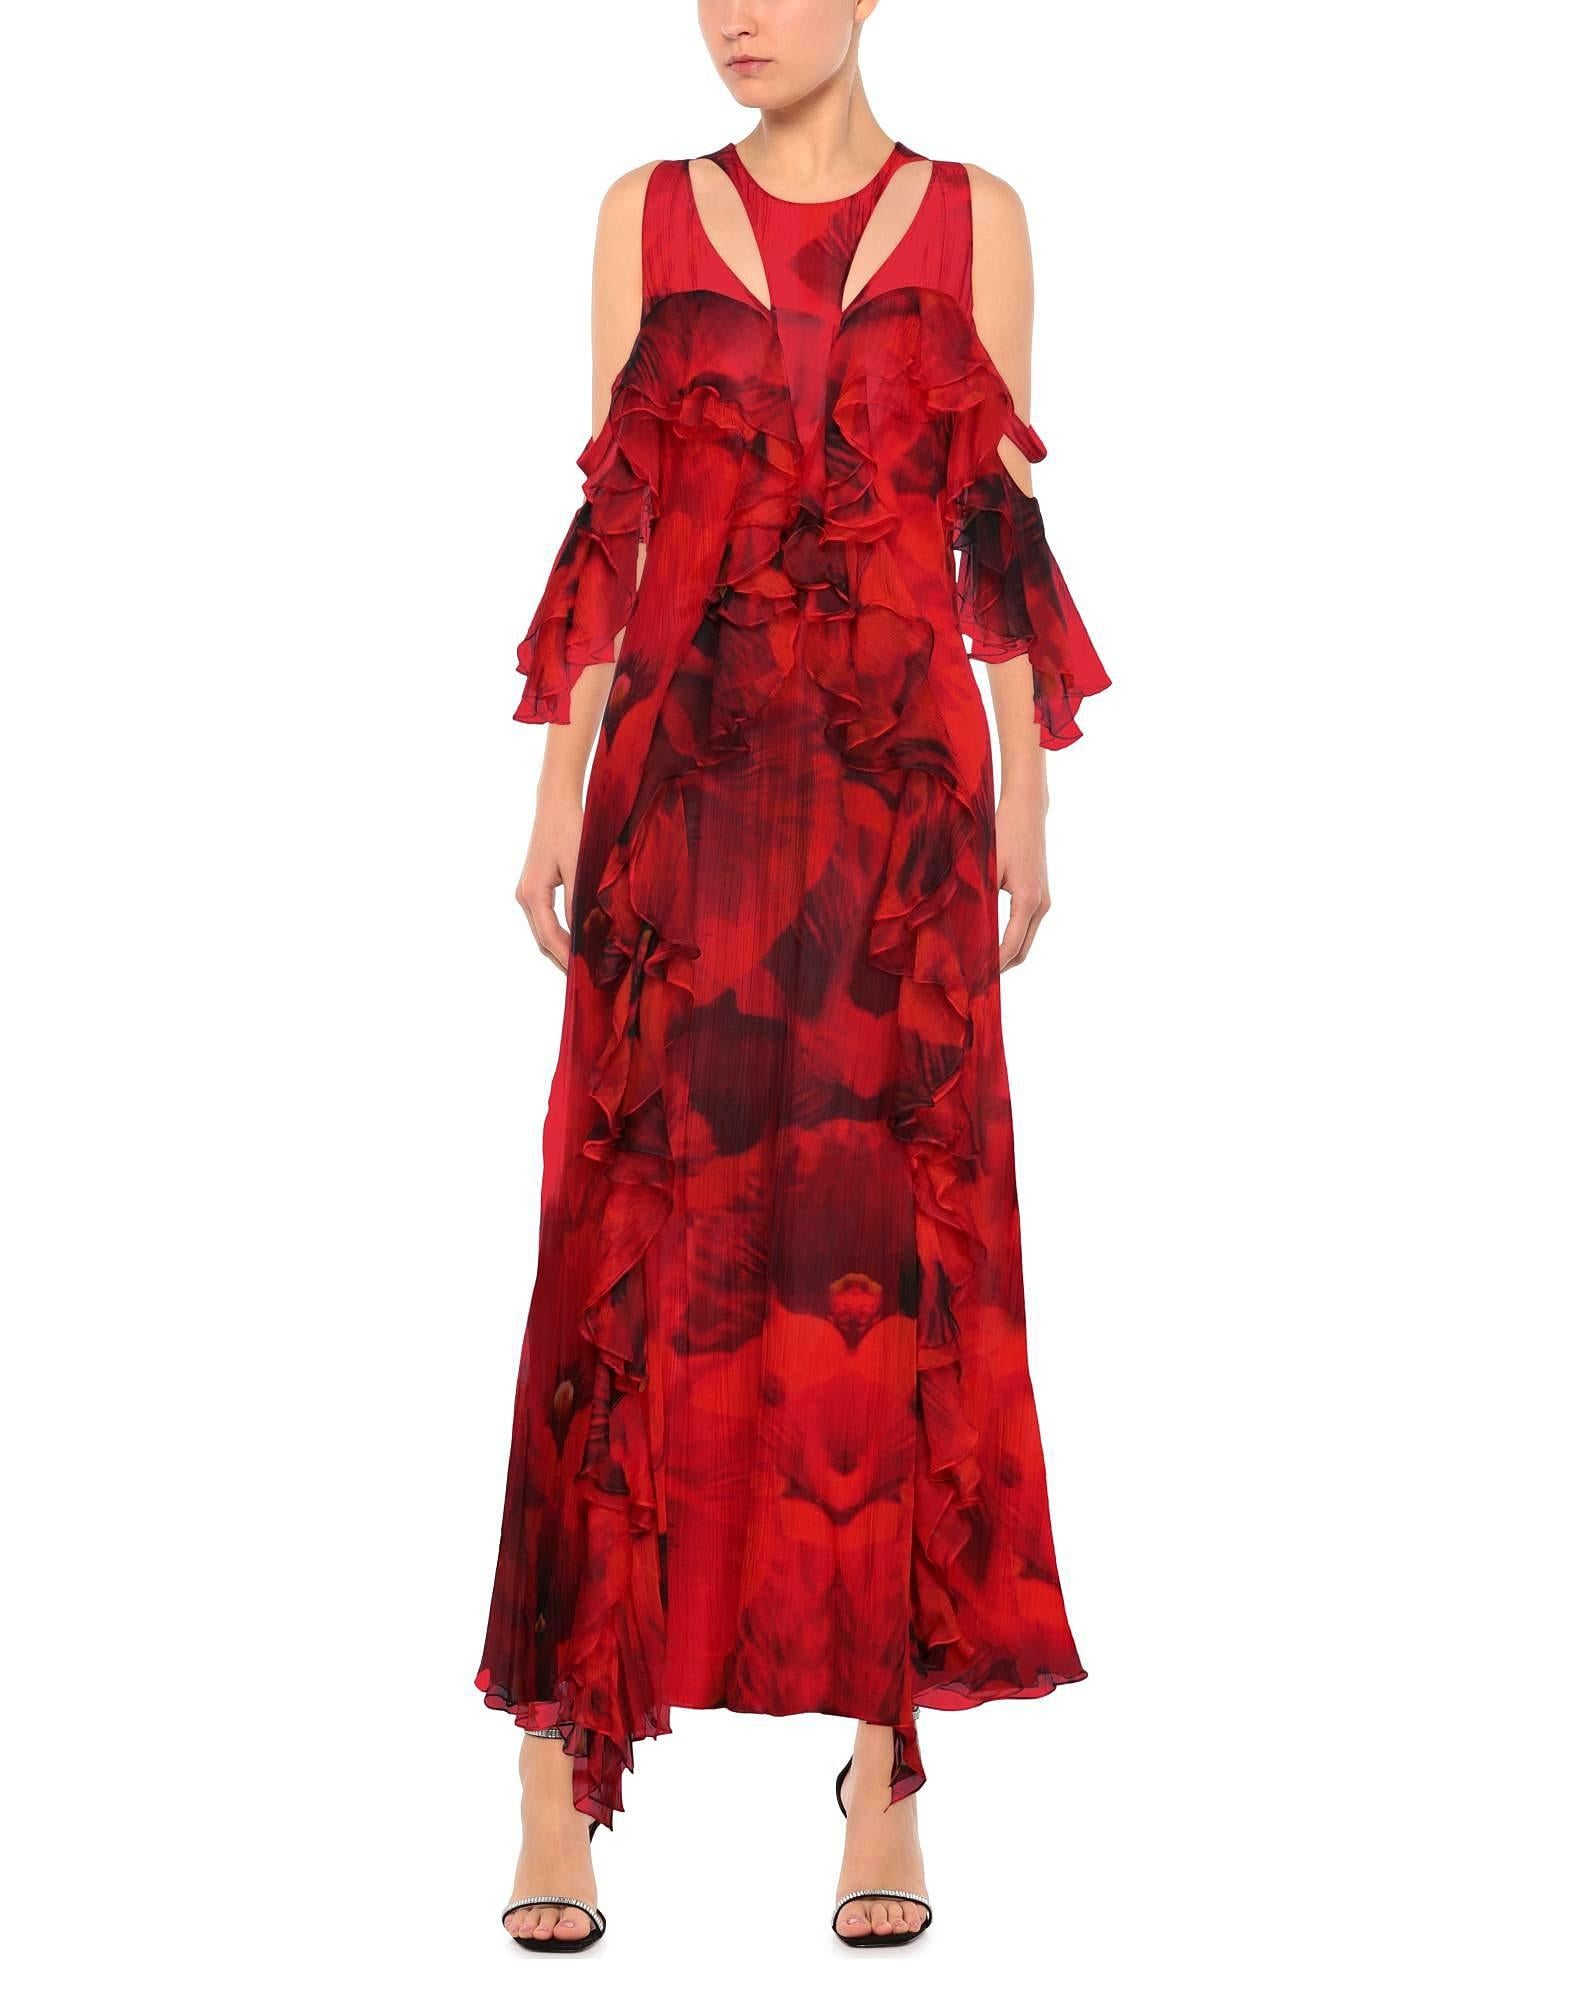 Red ALEXANDER MCQUEEN Cold-Shoulder Floral Print Silk-Chiffon Maxi Dress Gown 44 - 8 For Sale